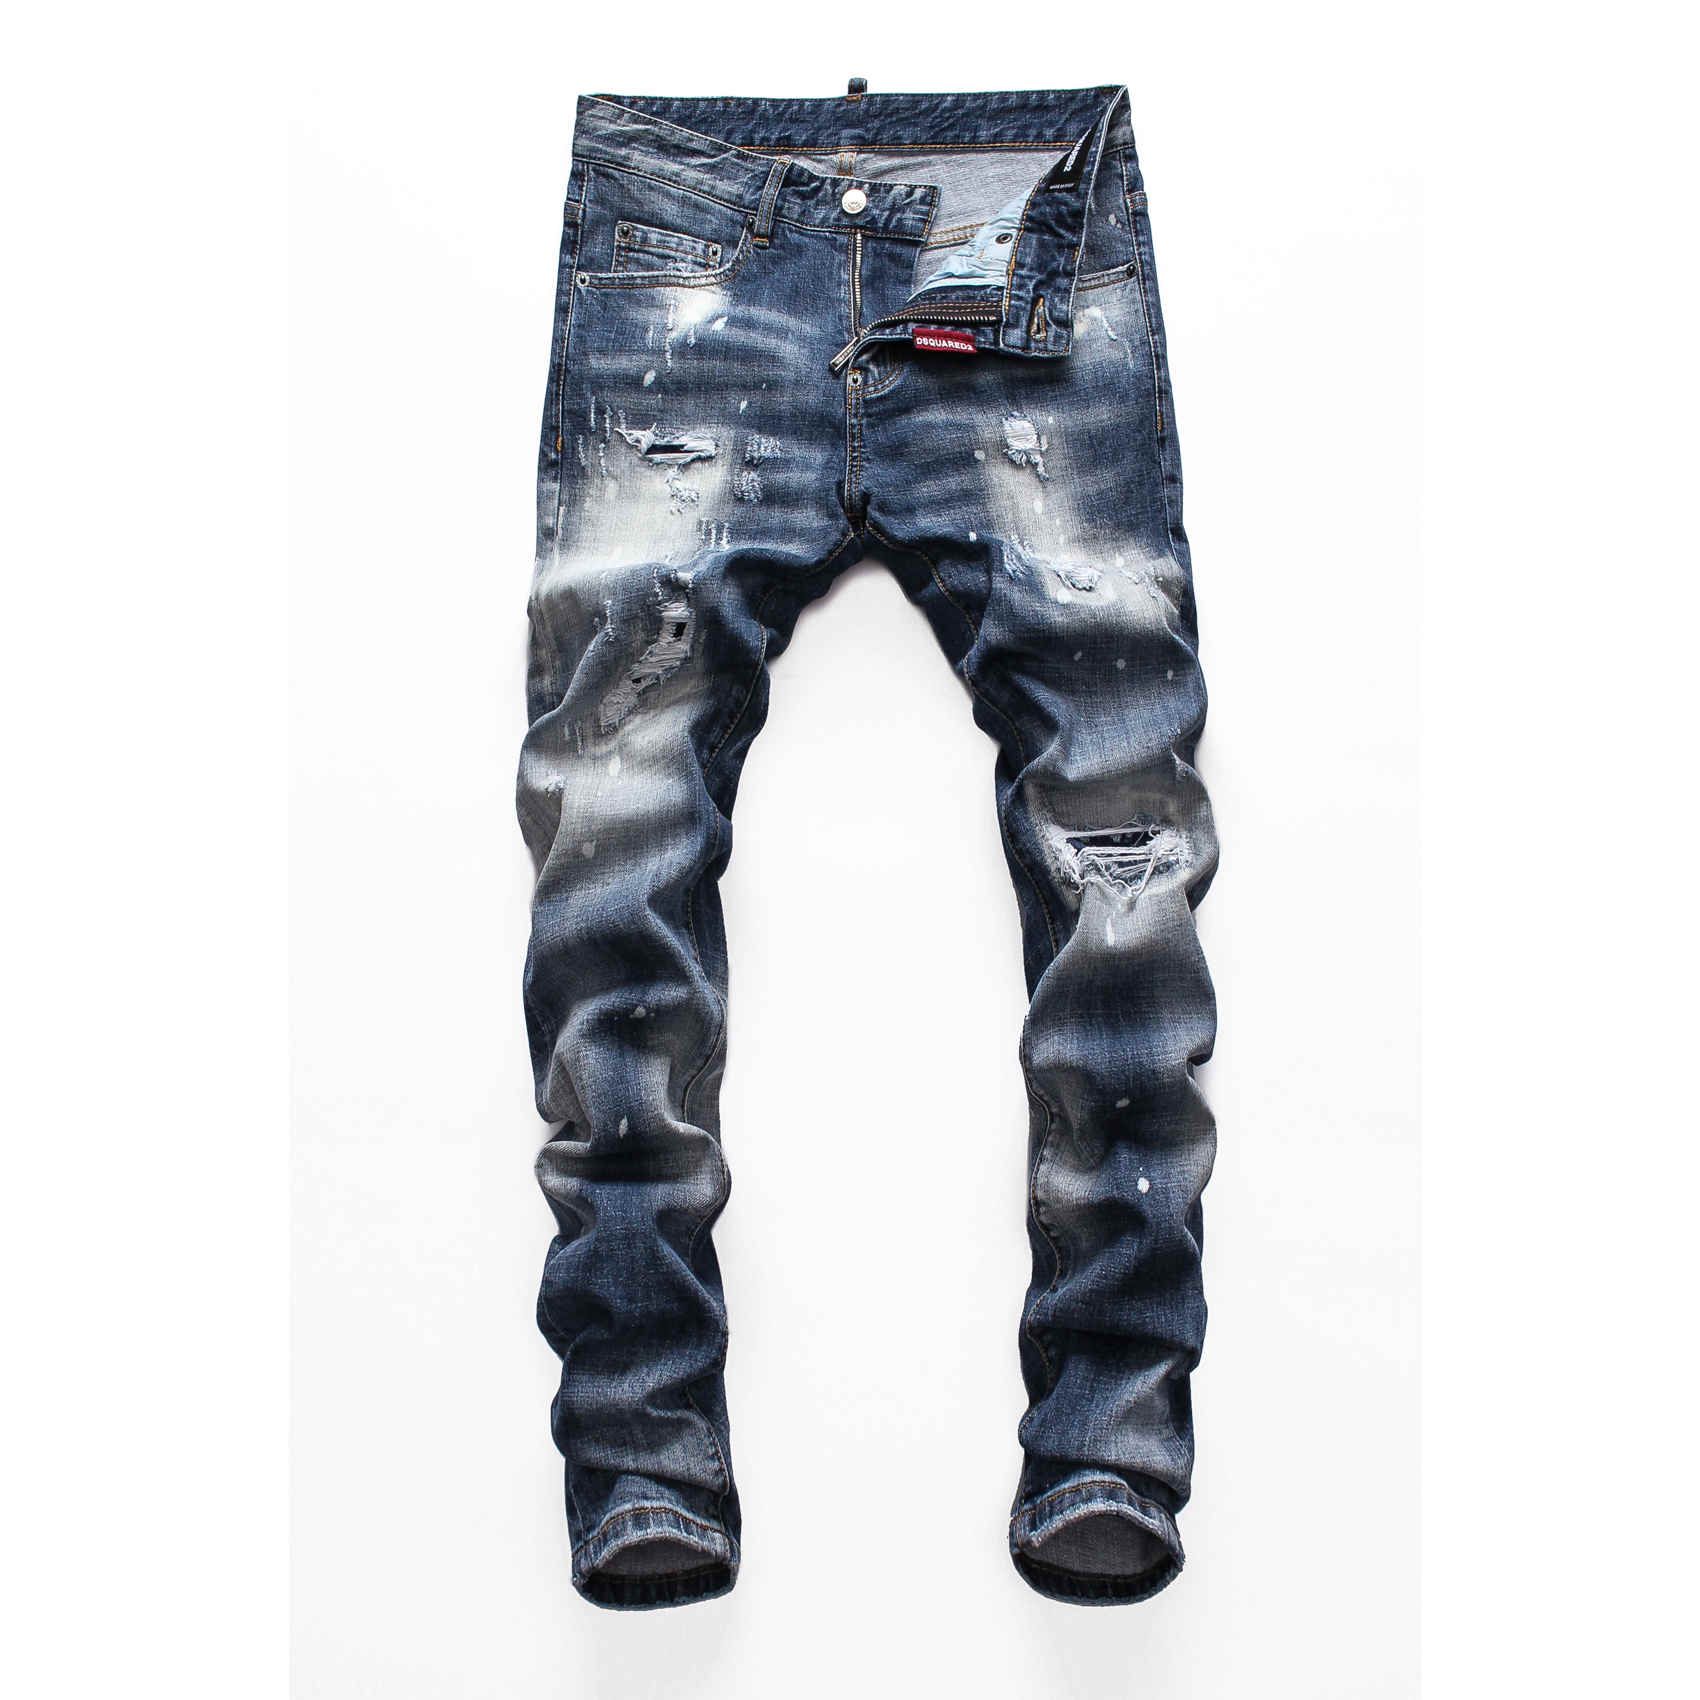 20ss Dq2 Mens Designer Jeans Jeans Denim For Fashion Hip Hop Mens Jeans Good Quality 03 From Gucci5959, $59.33 | DHgate.Com